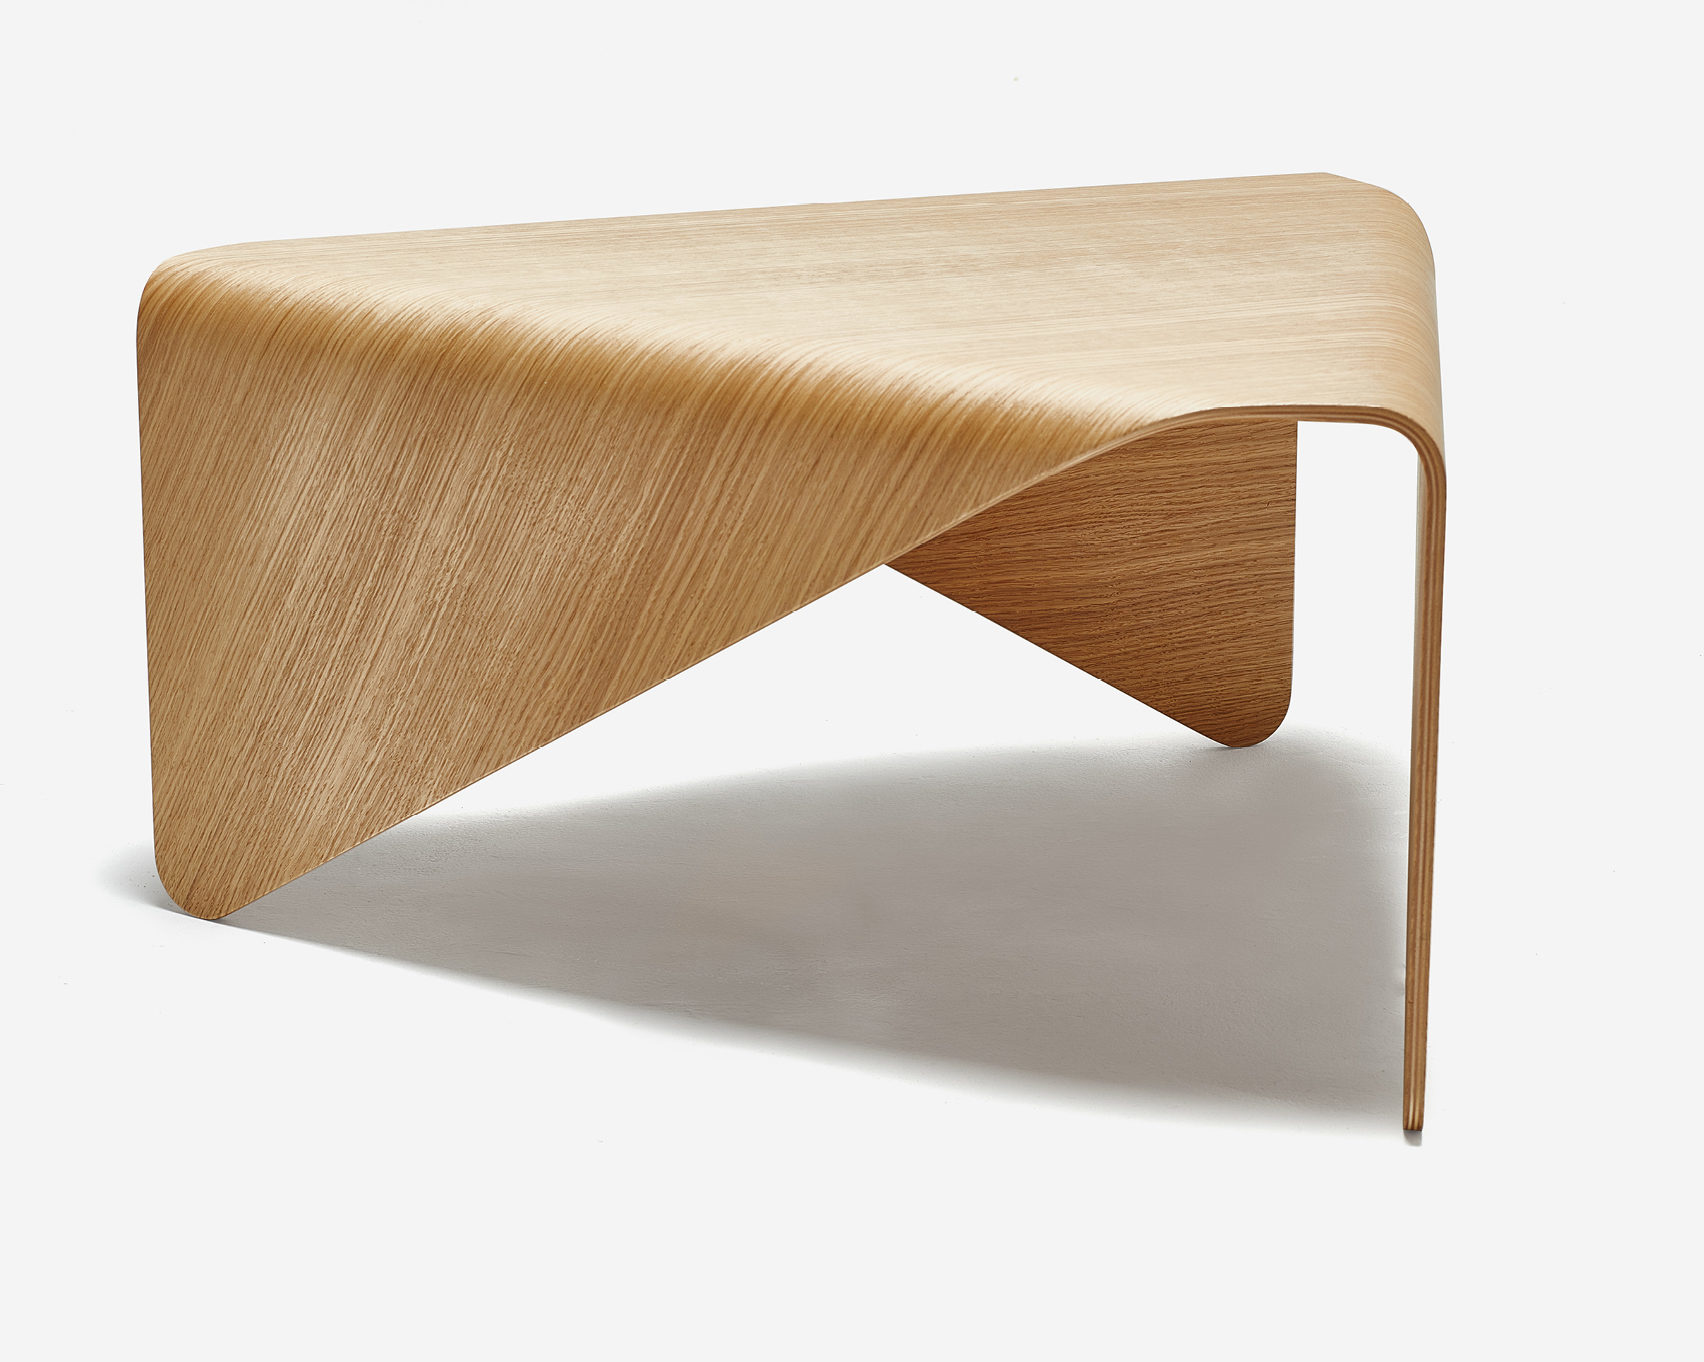 T46 COFFEE TABLE designed by Hein Stolle